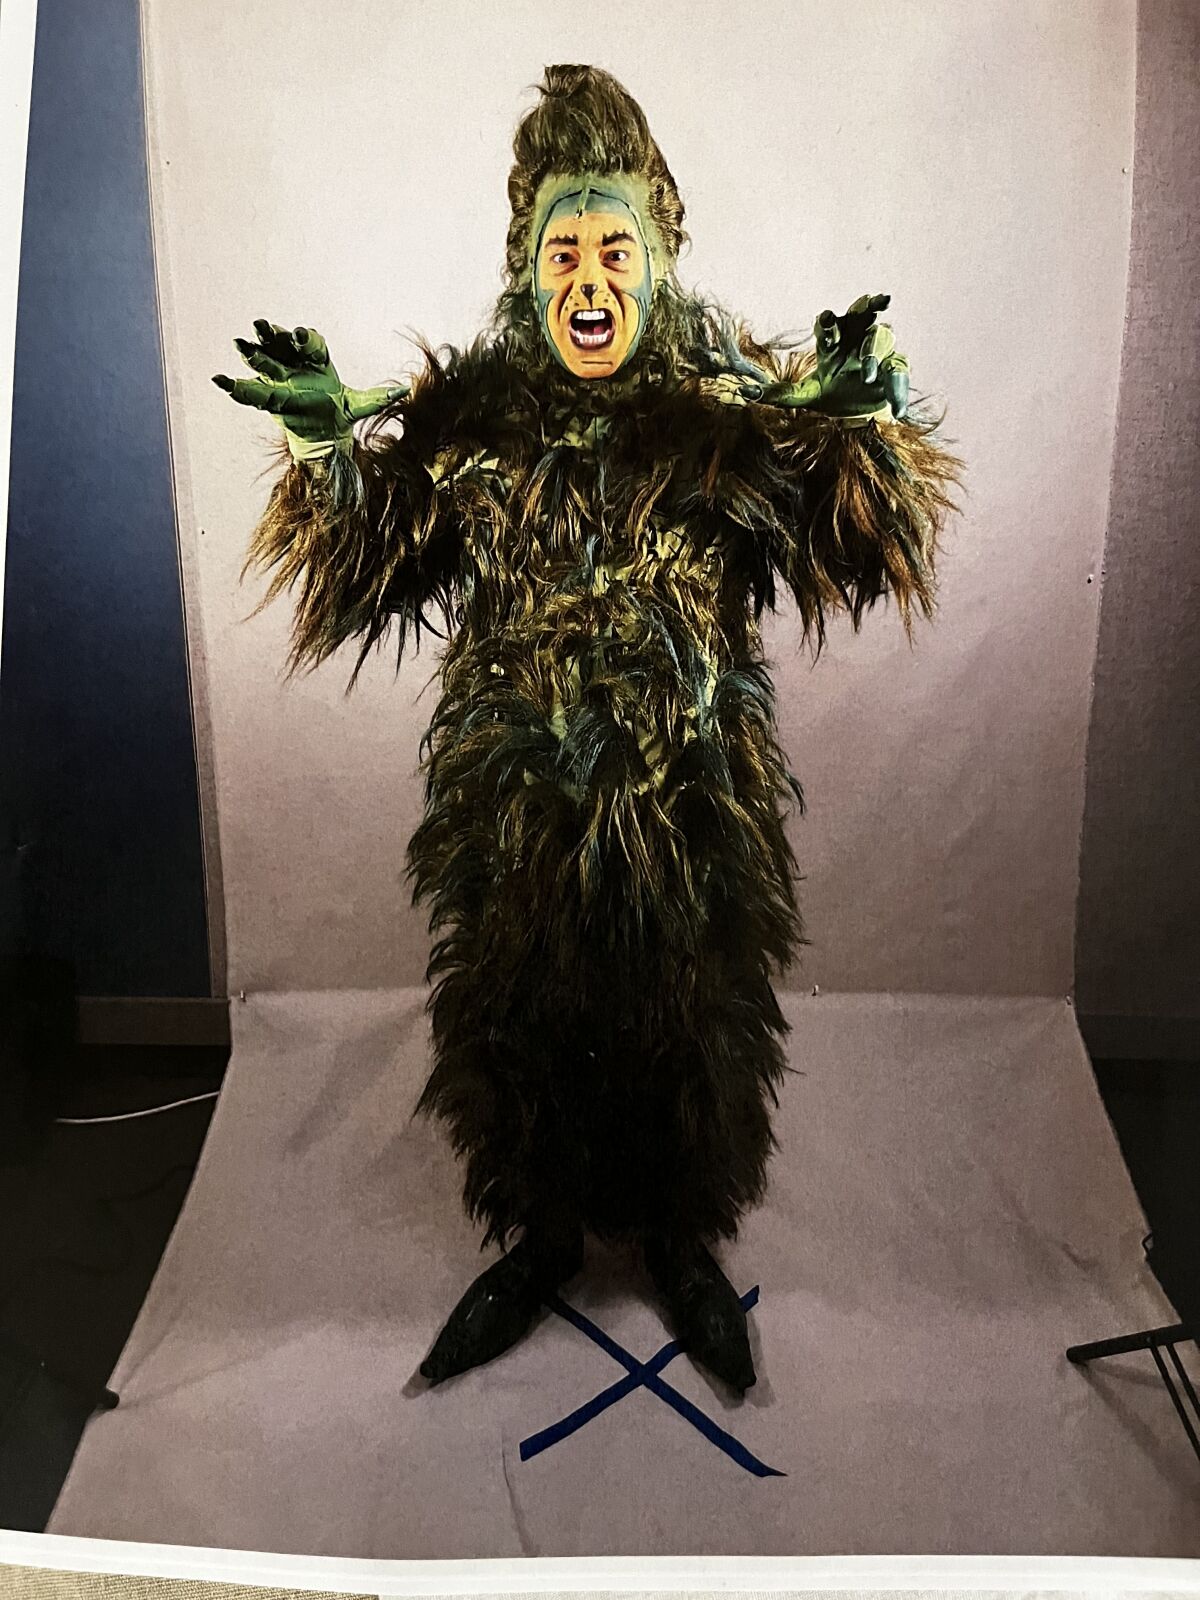 James Vásquez in costume as the Grinch for "Dr. Seuss's How the Grinch Stole Christmas!" at the Old Globe.